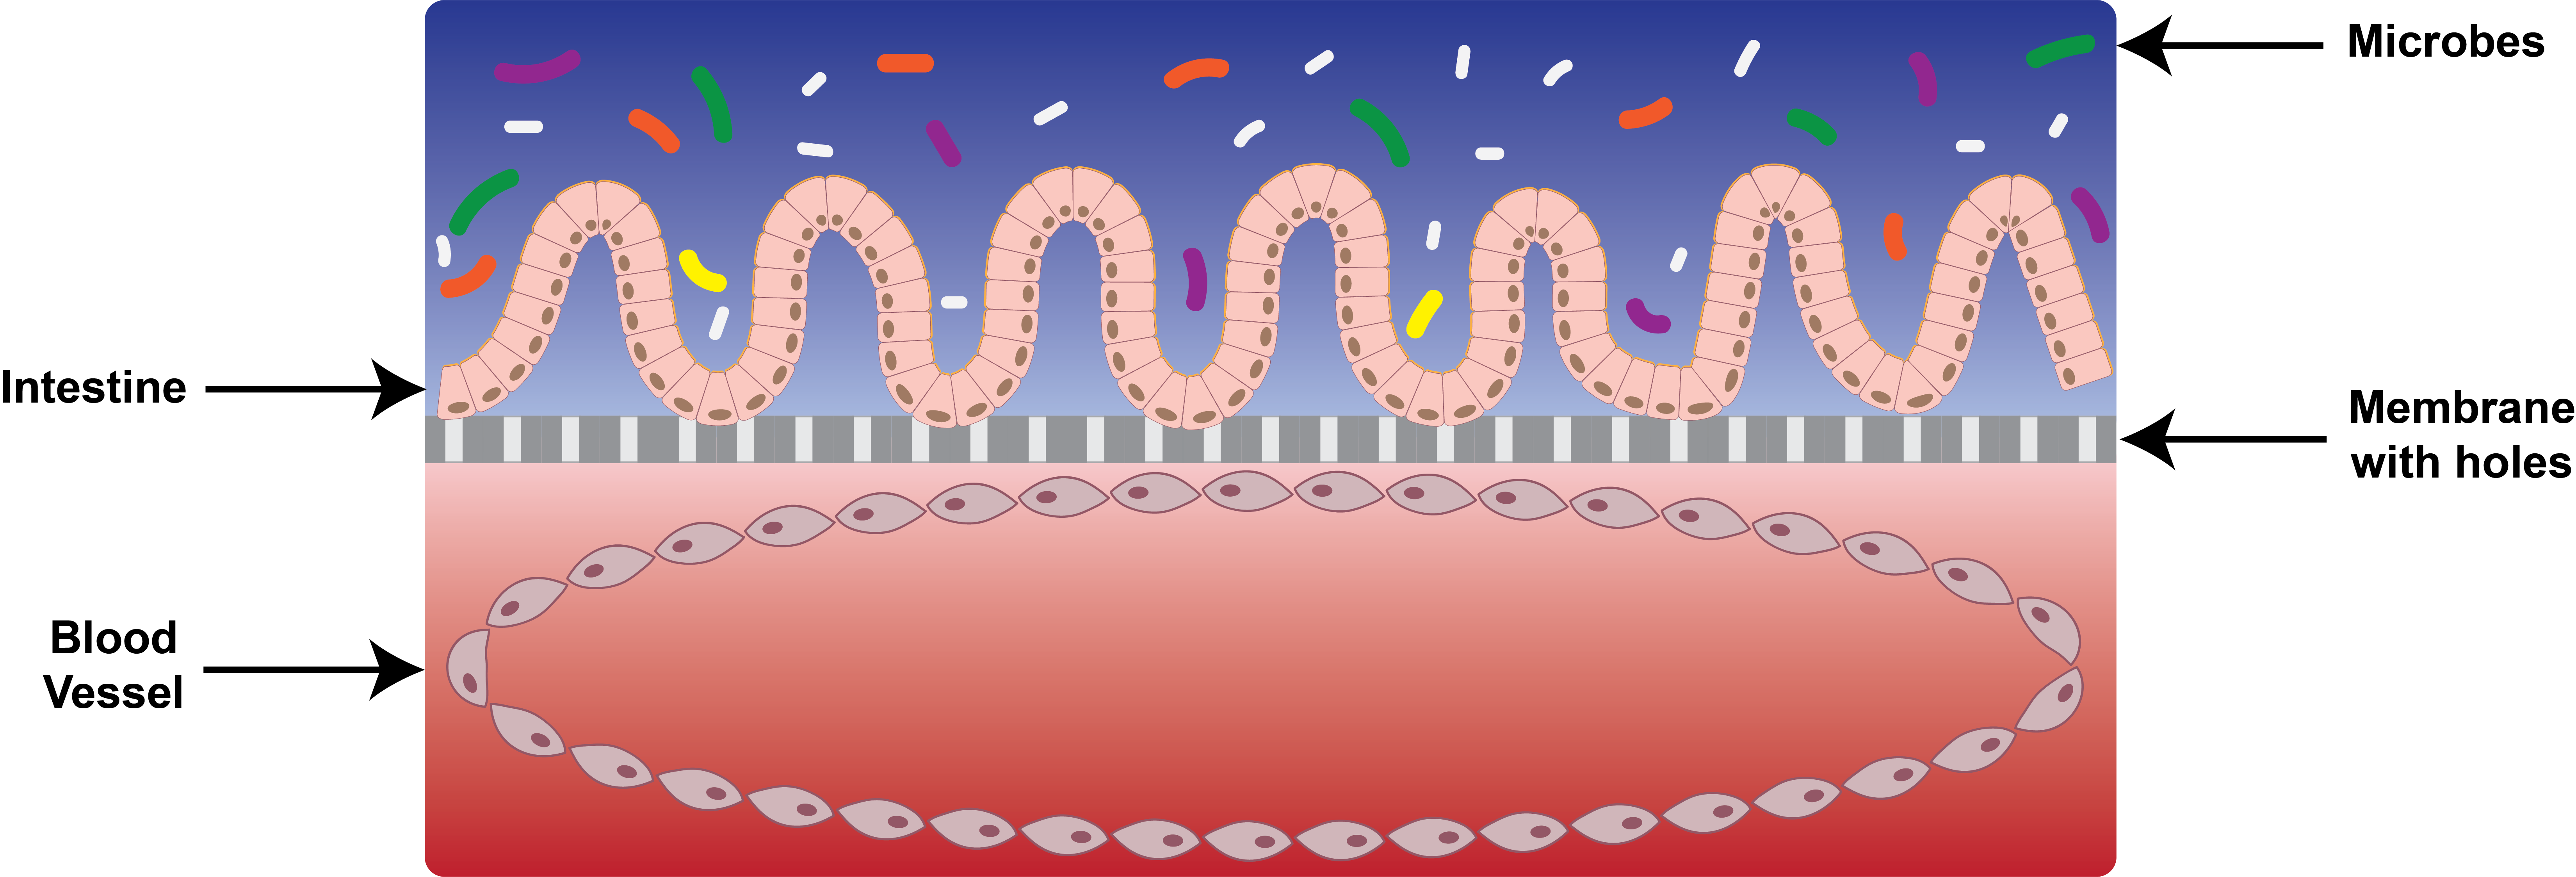 cartoonized cross-section of an intestine on a chip